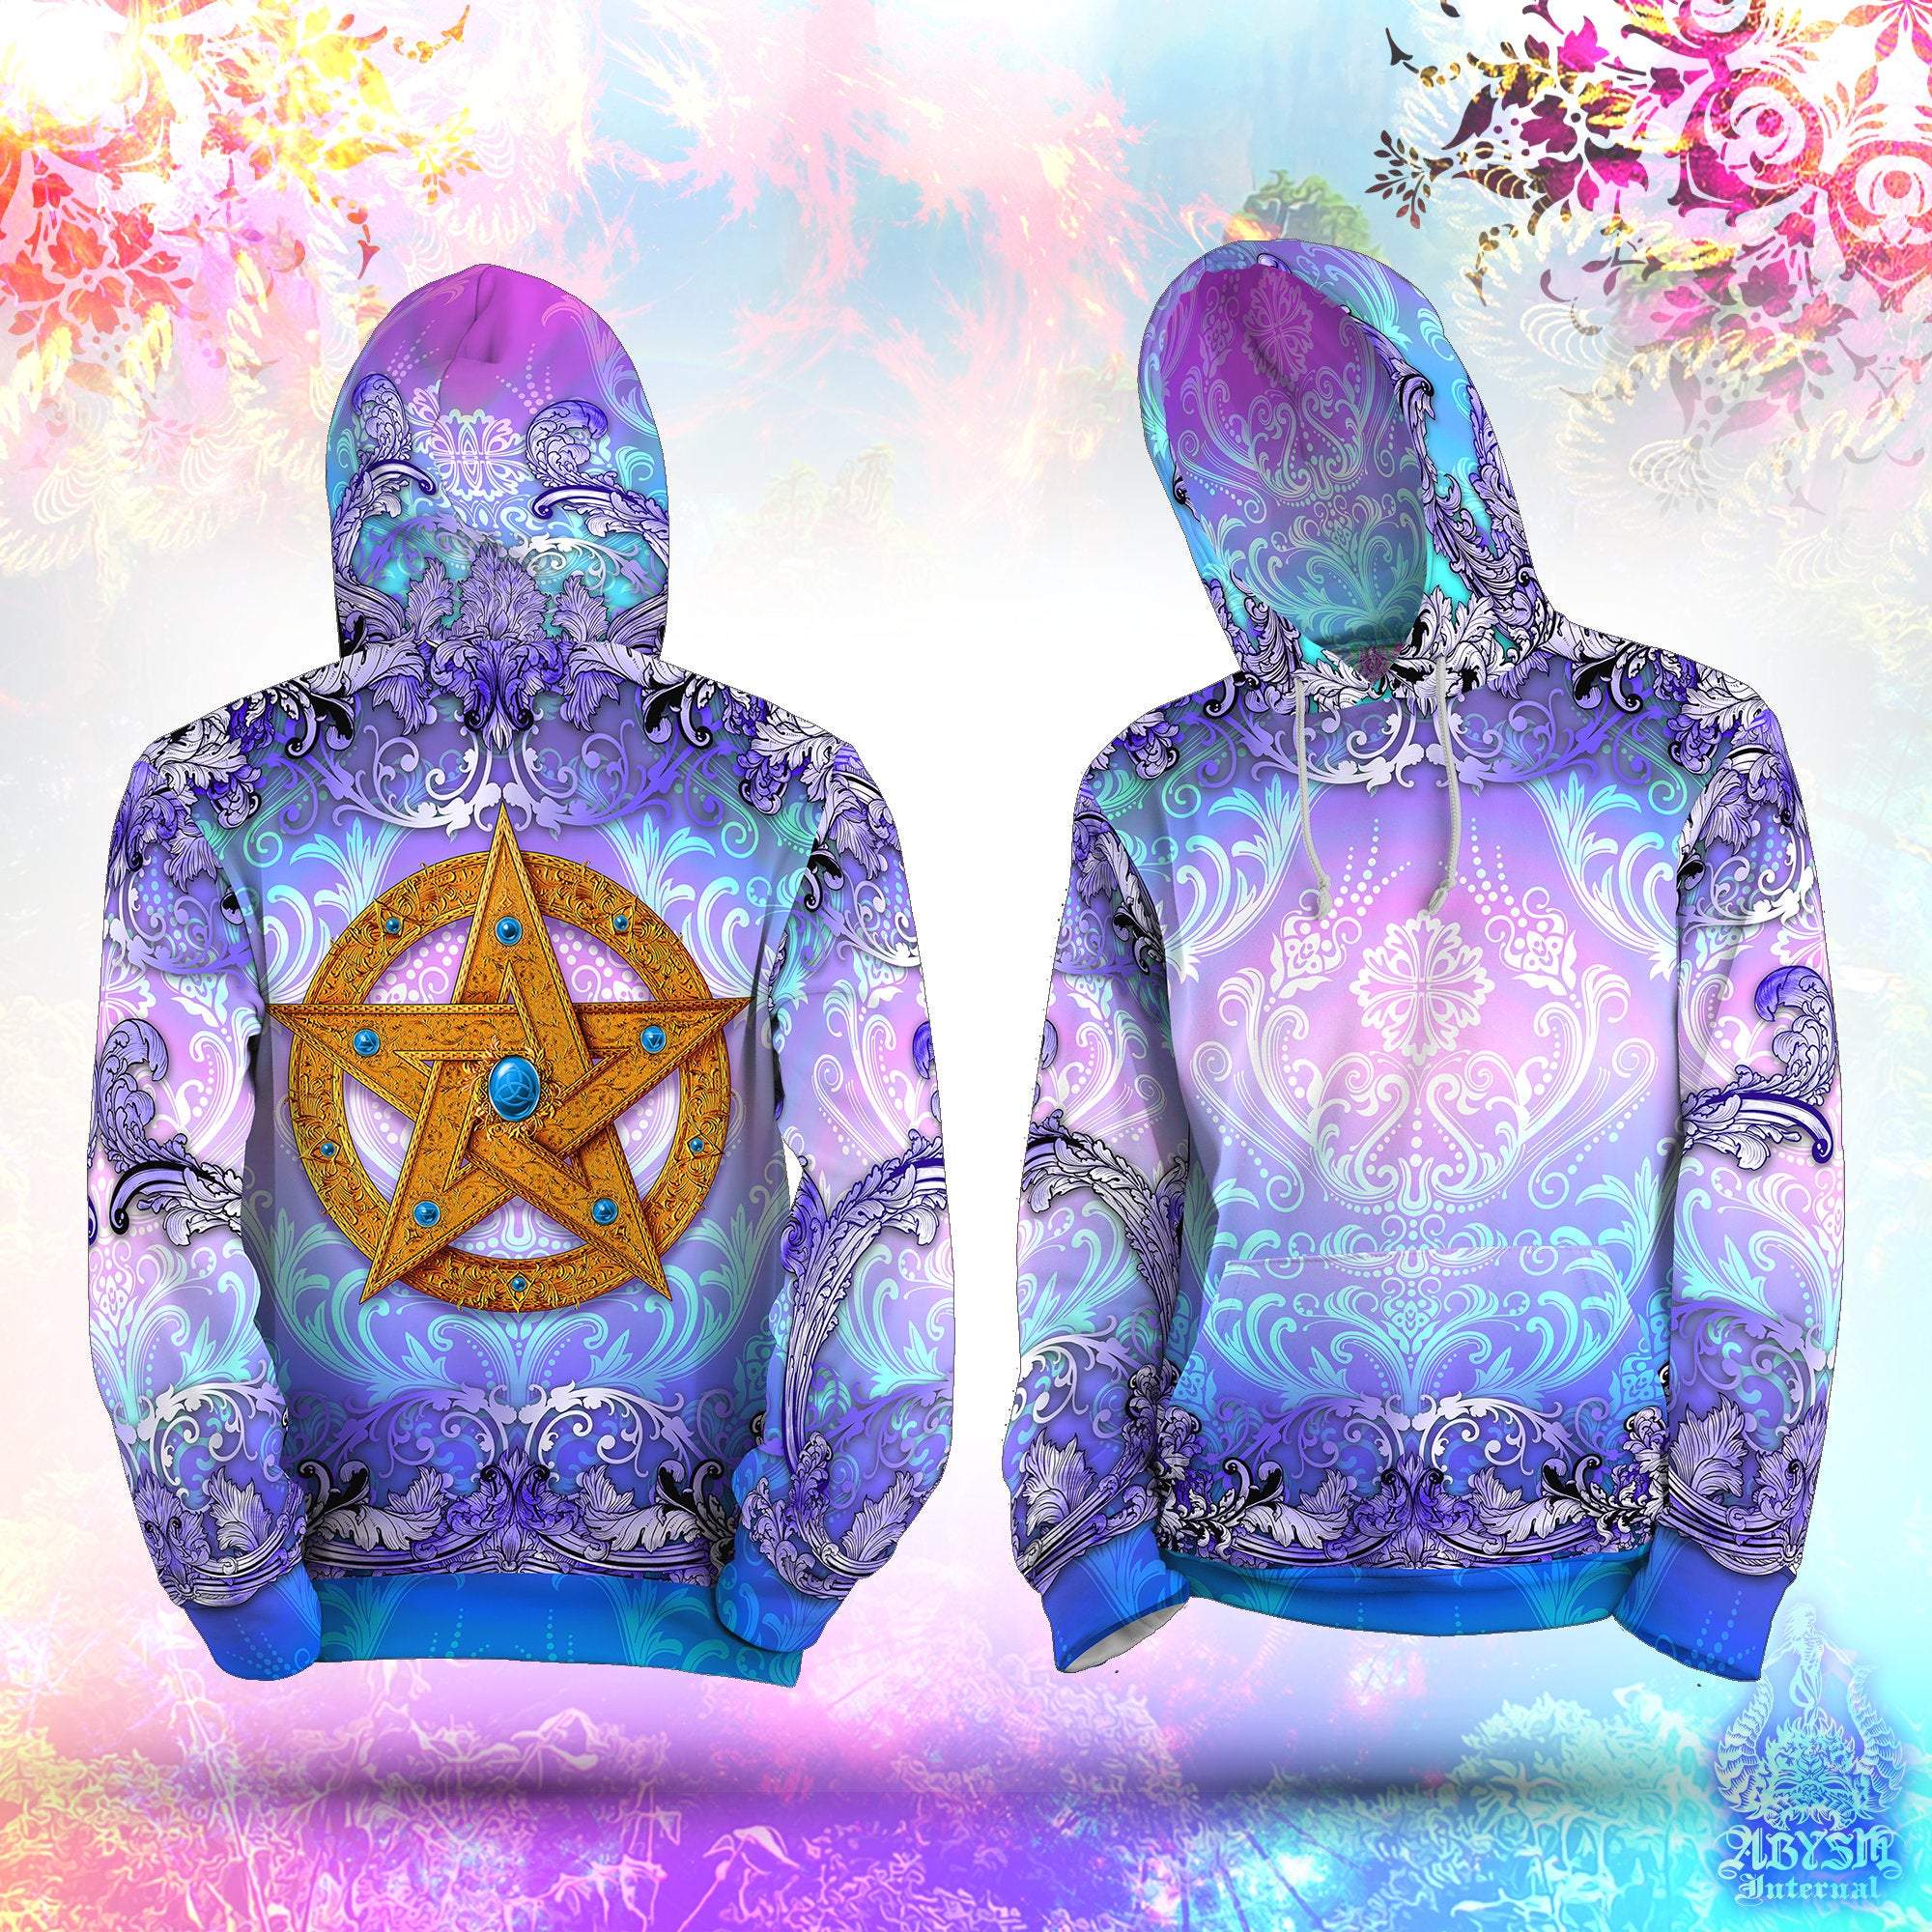 Wicca Hoodie, Witchy Outfit, Pagan Streetwear, Witch Sweater, Alternative Clothing, Unisex - Pentacle, Bllue - Abysm Internal